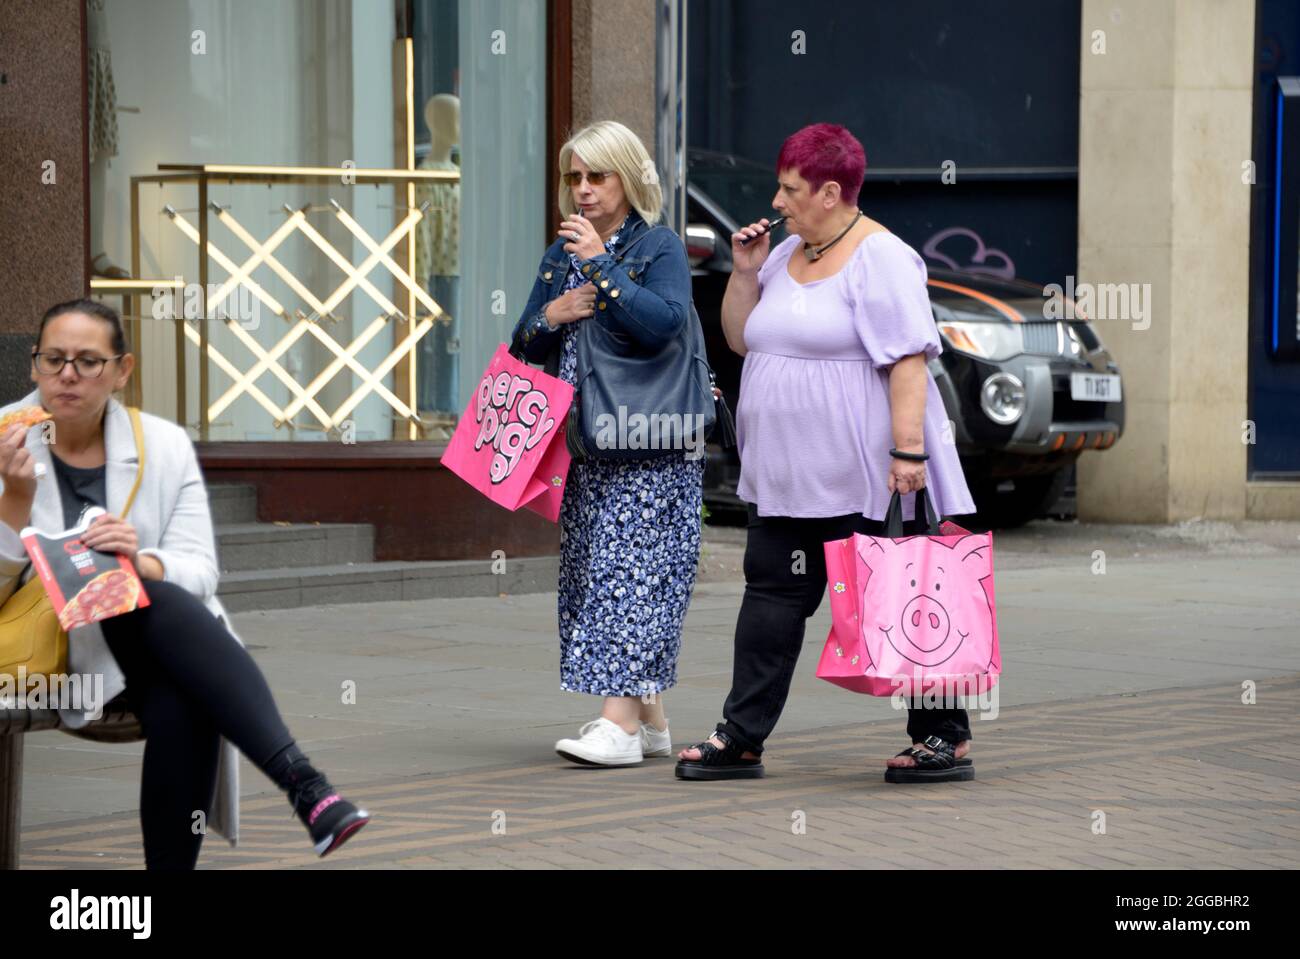 Women out shopping with pink pig bags. Stock Photo